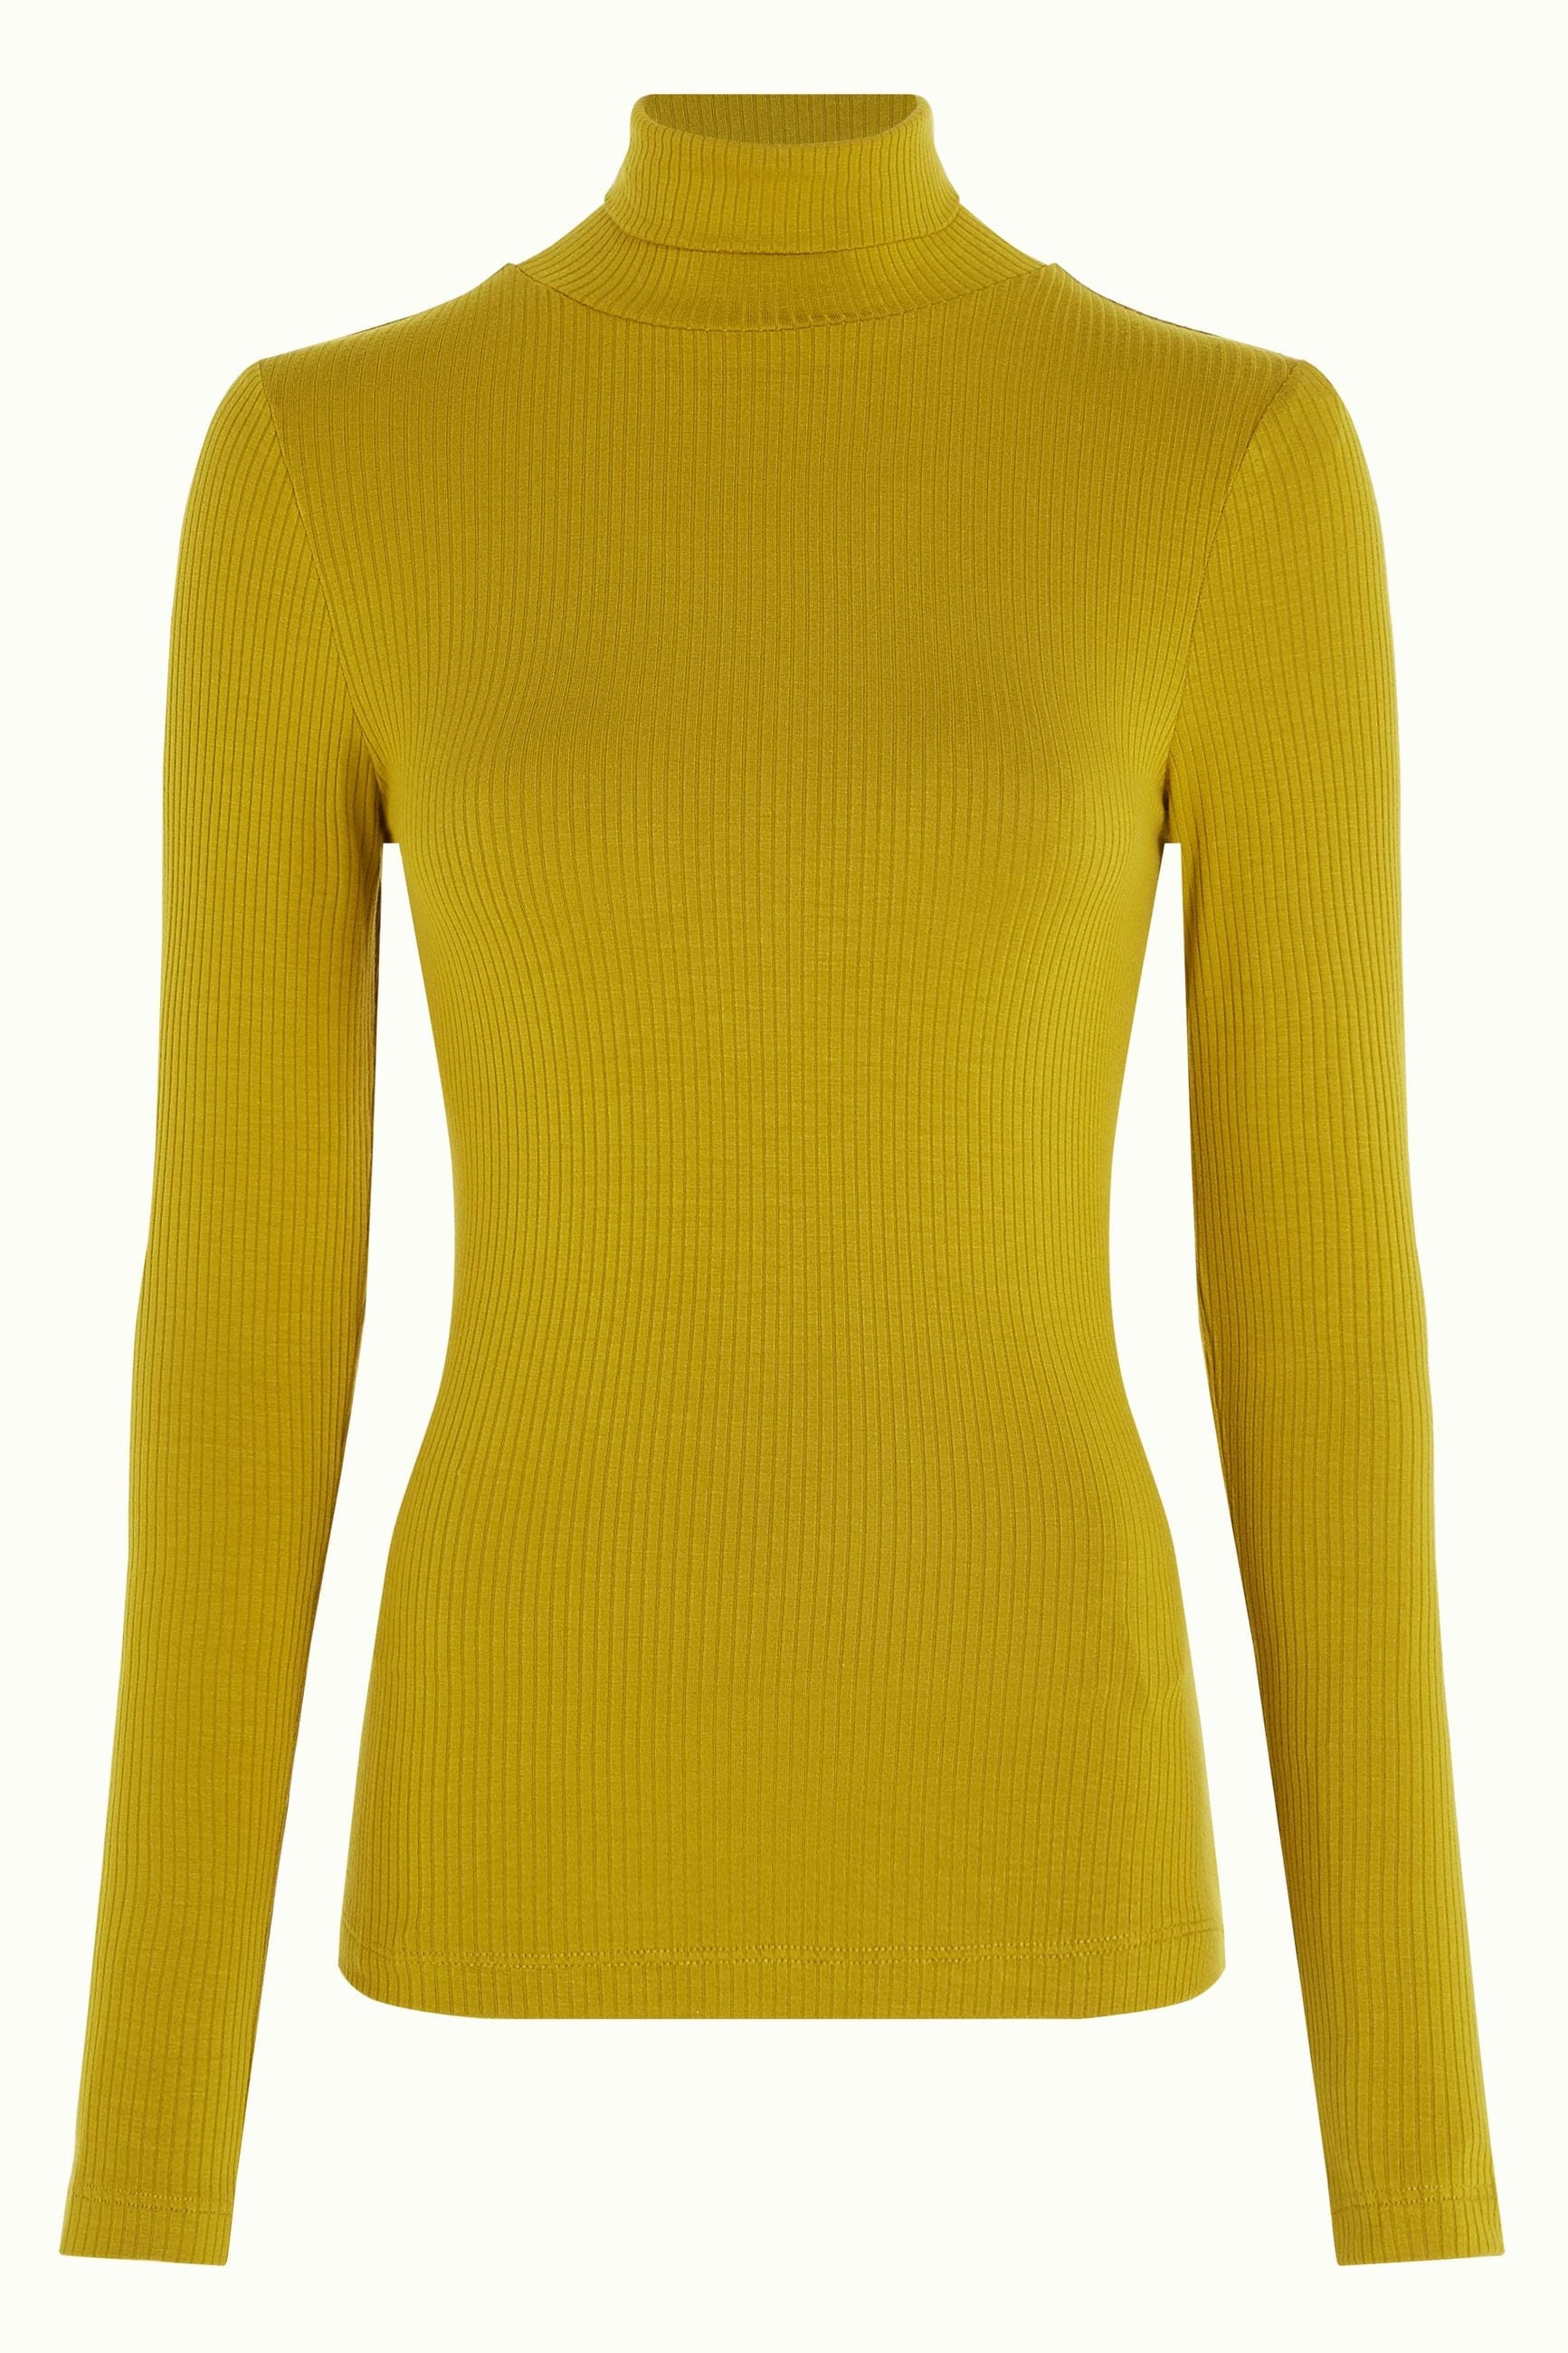 King Louie Overdeler Pologenser rollneck rib - curry yellow